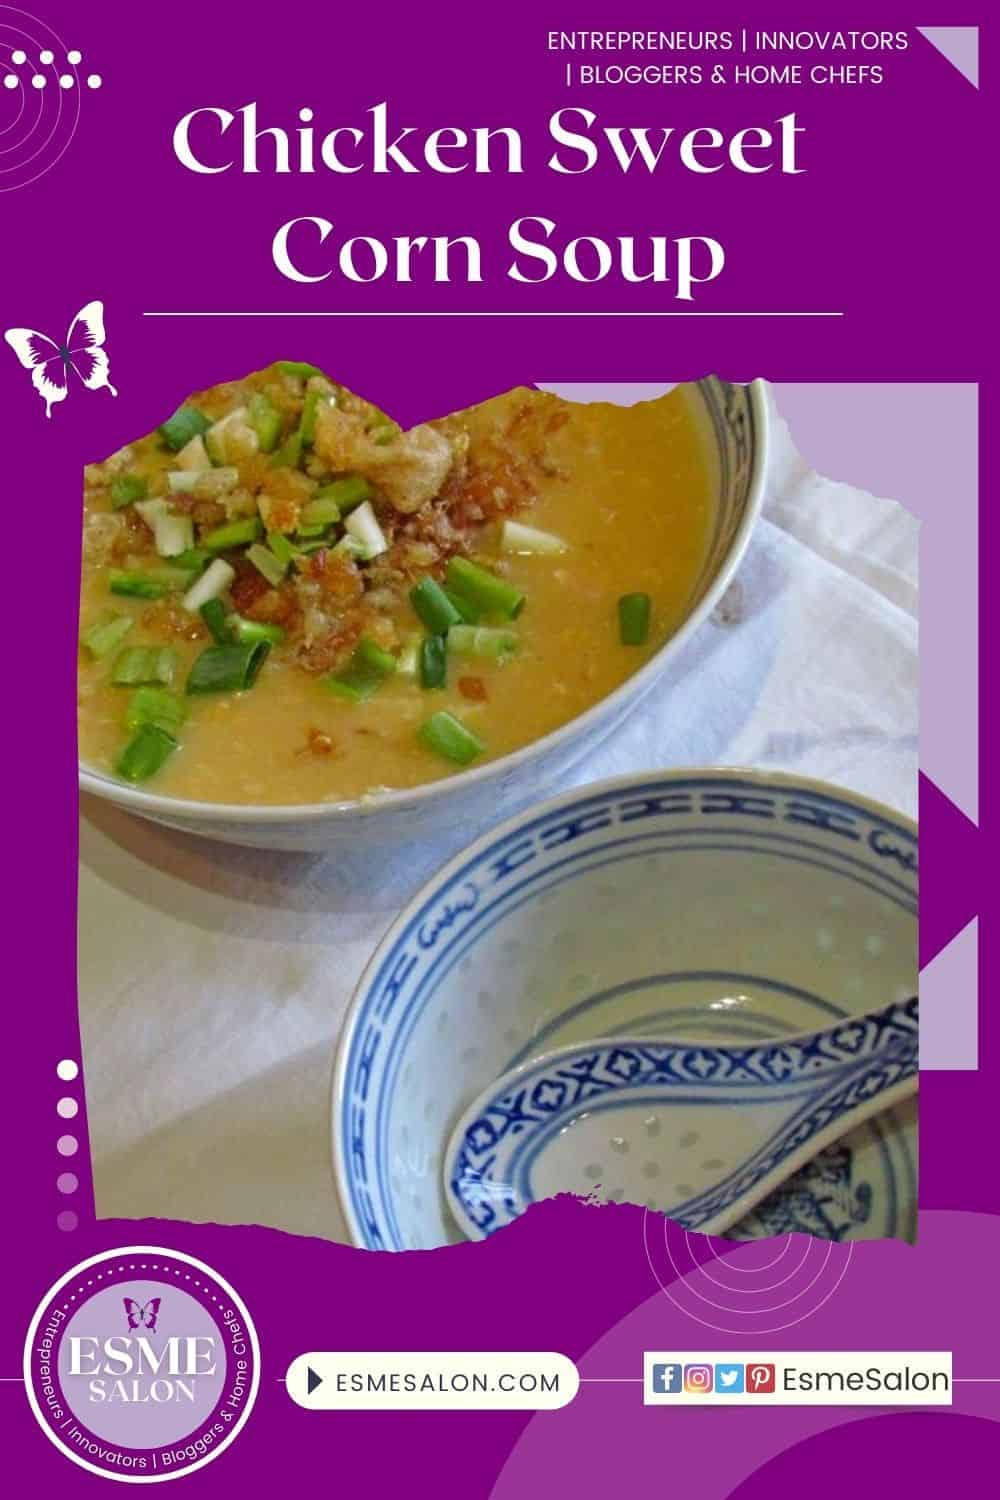 An image of two Chinese bowls with Chicken Sweet Corn Soup